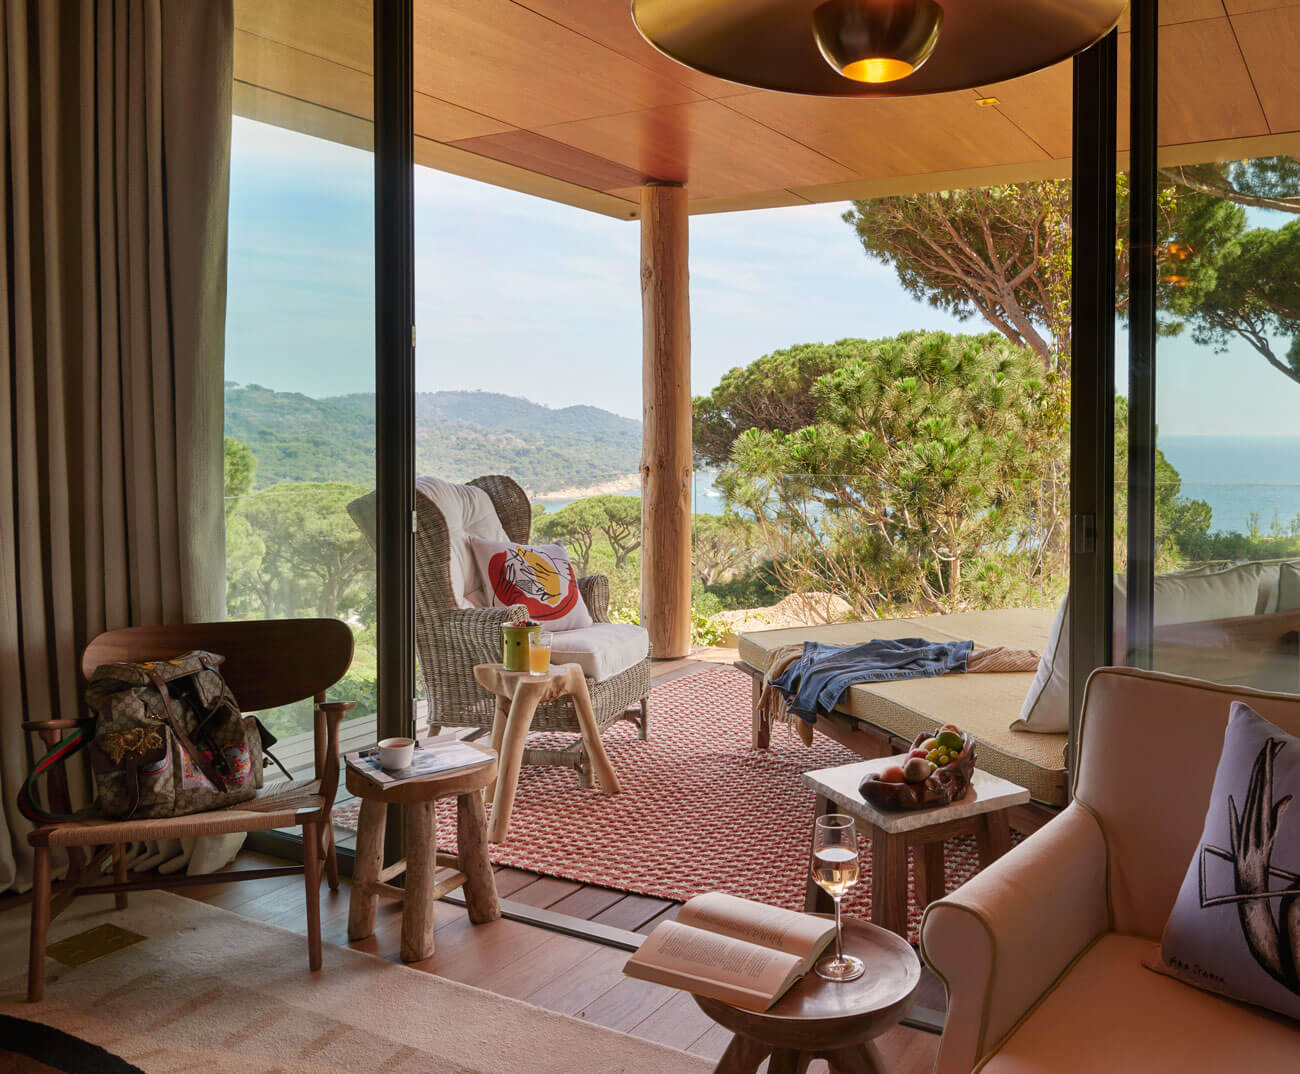 Raw Luxury Meets Authenticity In This Hotel Interior In Provence_authentic interior